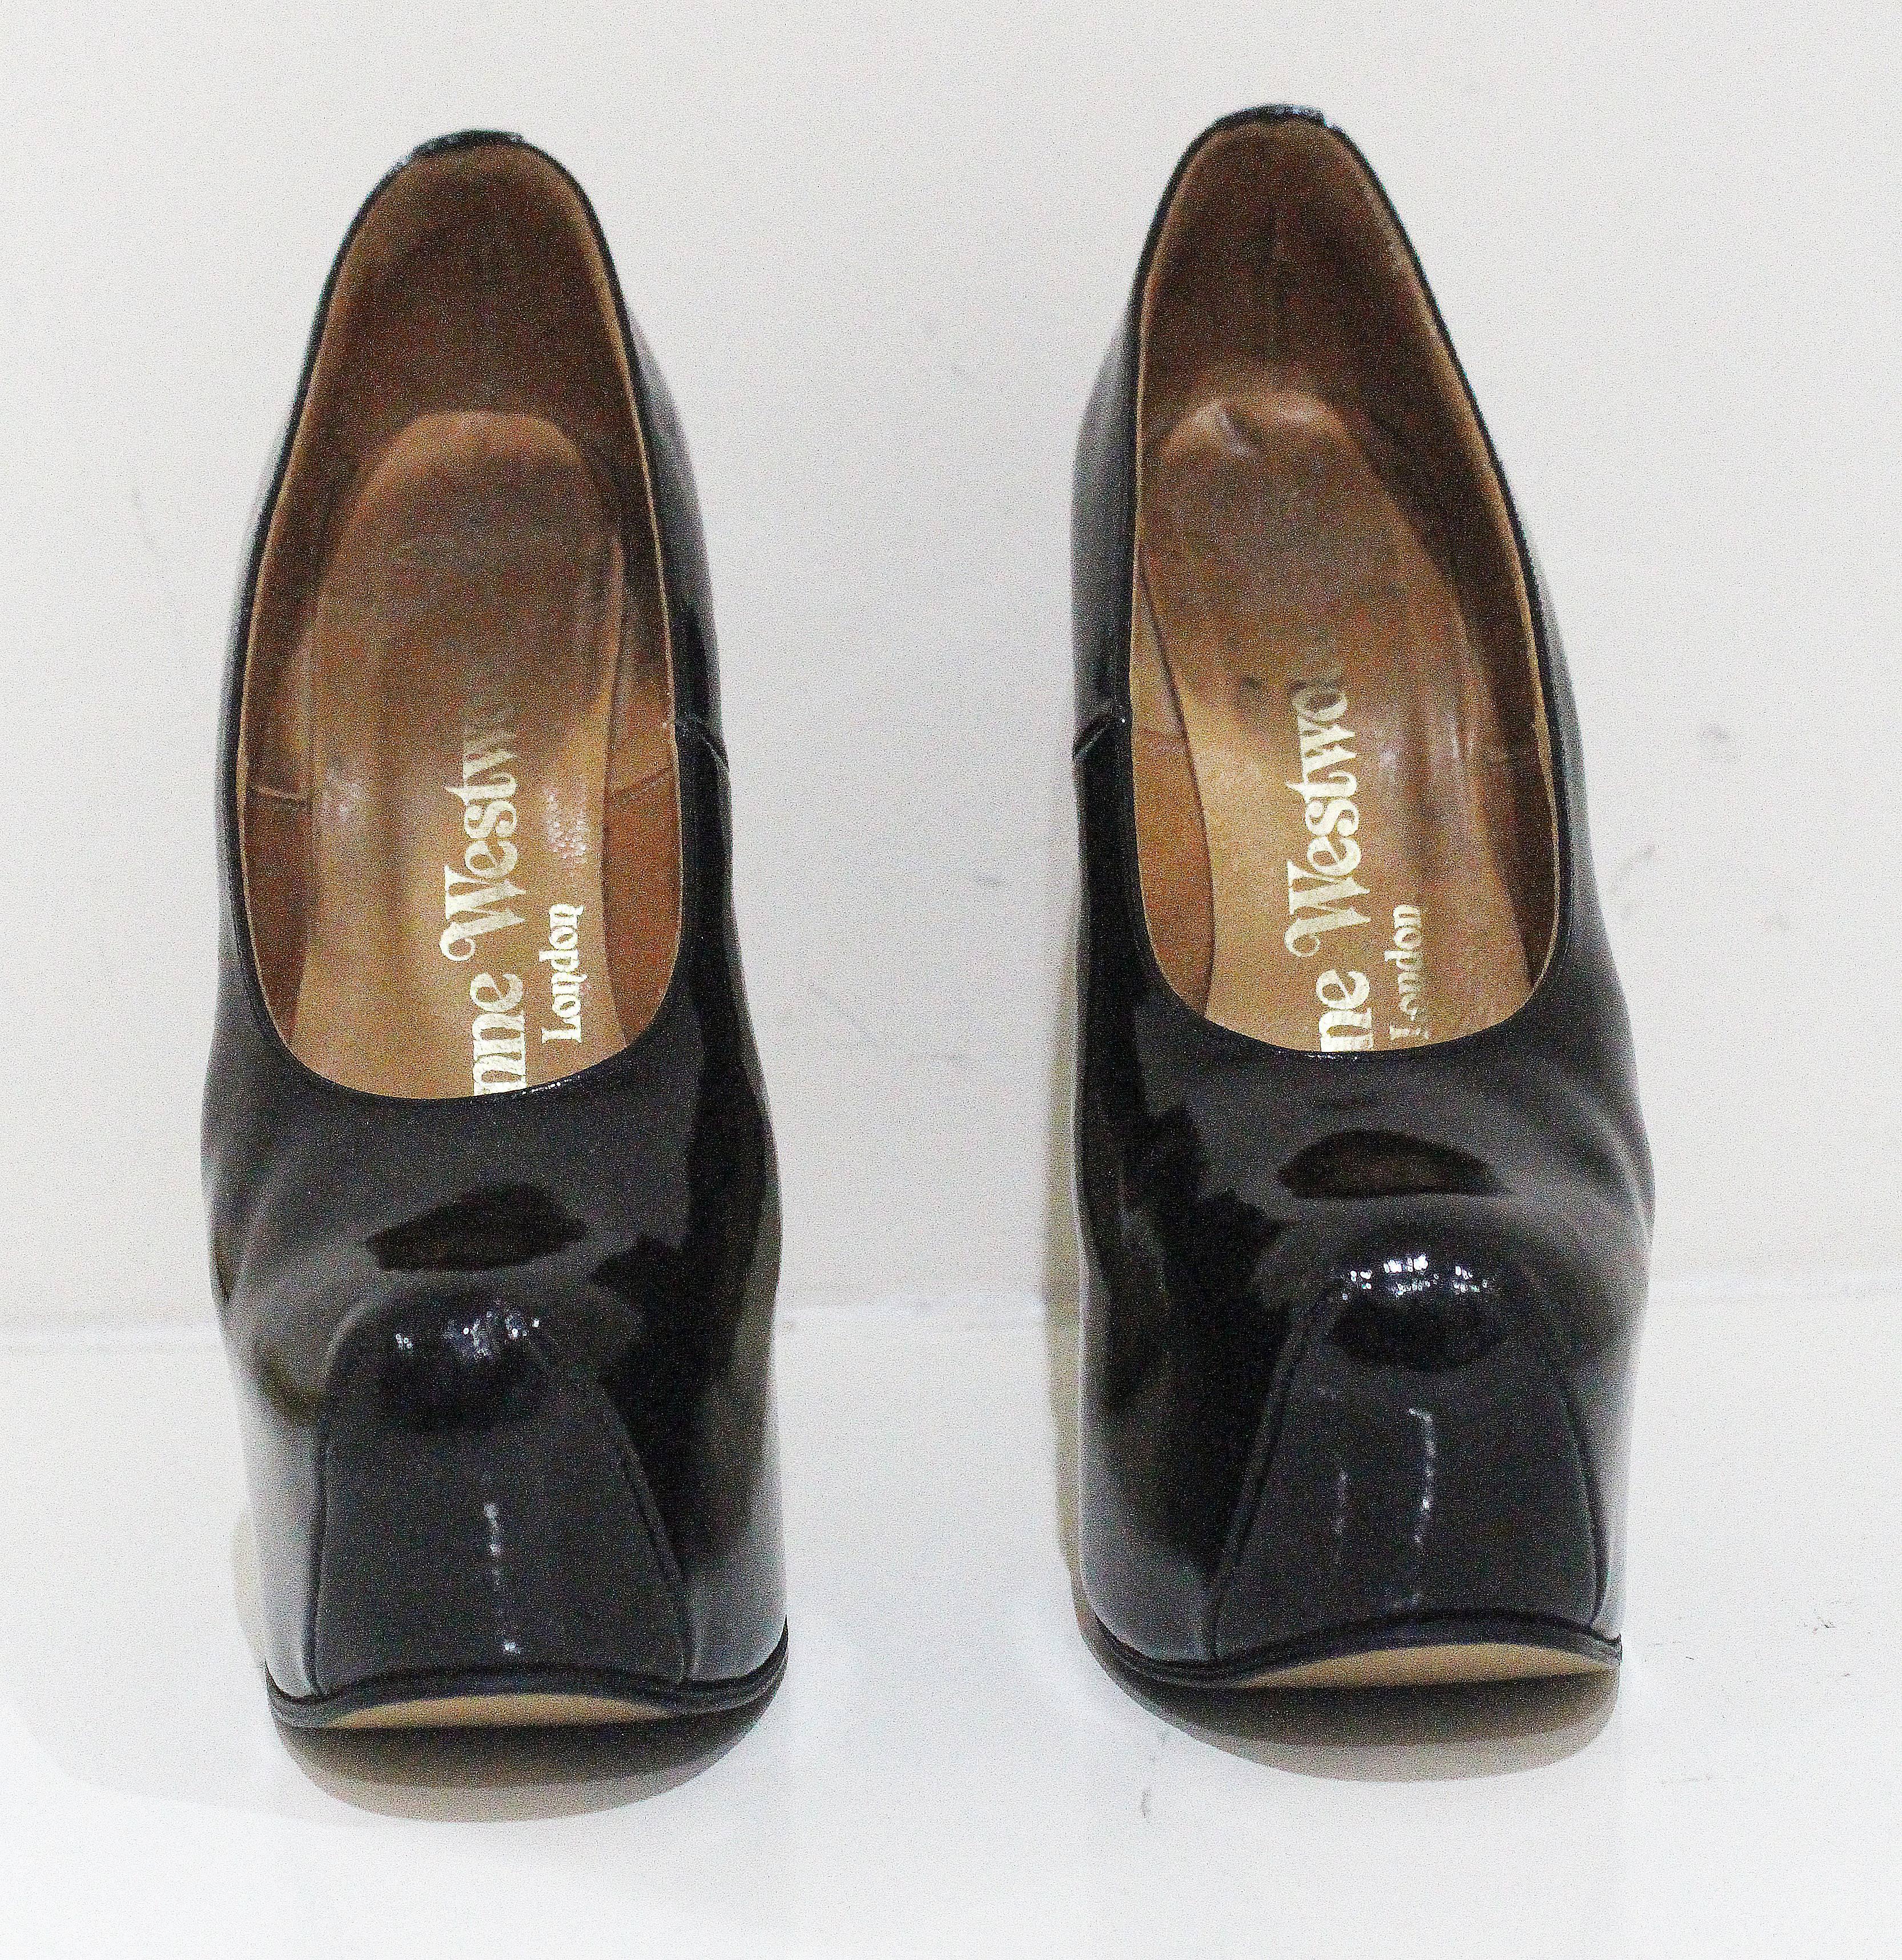 A rare pair of Vivienne Westwood elevated court shoes in black patent leather. Made in the early 1990s. 

Size UK 5 

